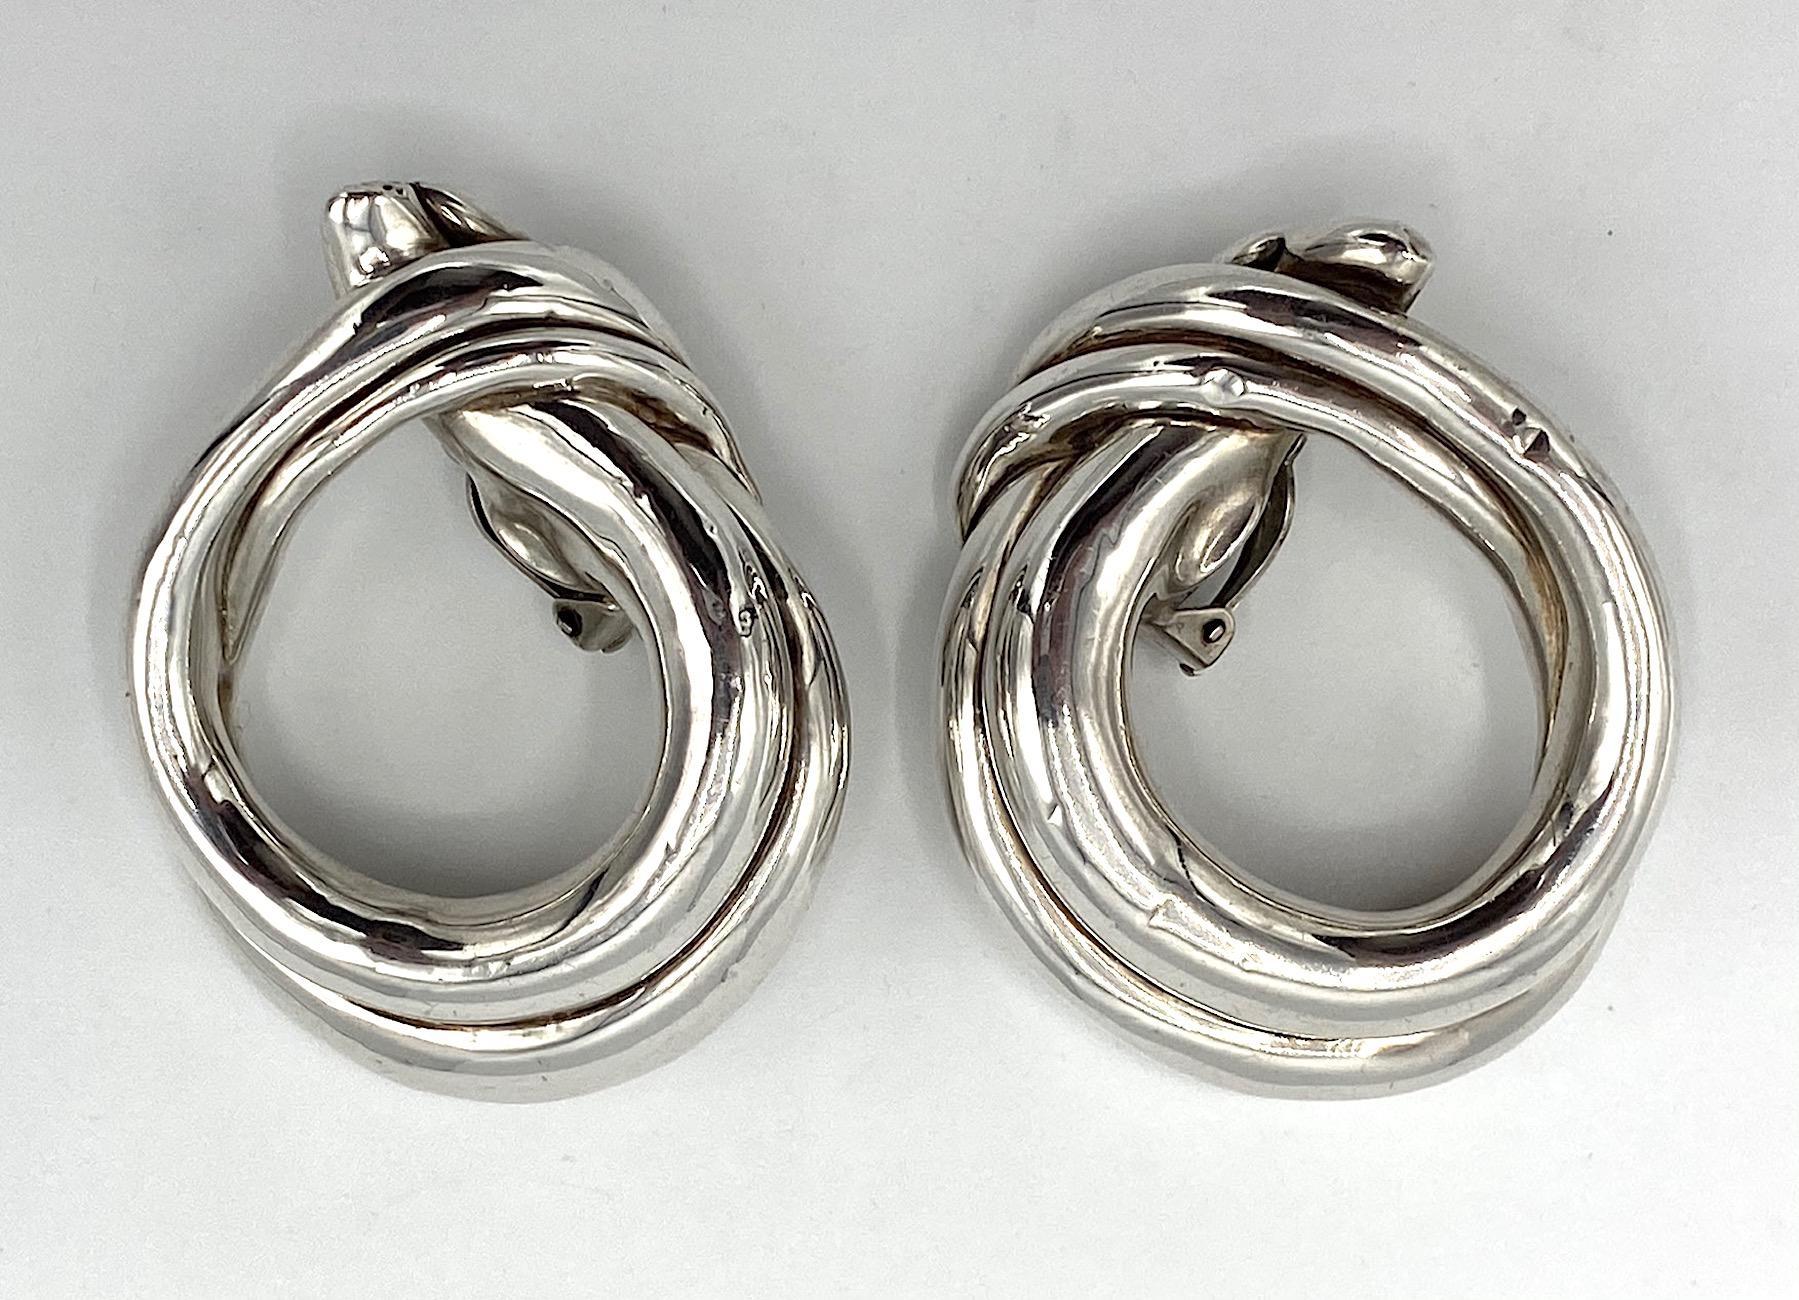 An elegant and large pair of 1980s modernist sterling silver earrings by modernist Israeli jewelry David Varsano. Each earrings is a double wide wrap loop of sterling silver 1.82 inches wide, 2.38 inches tall and .63 of an inch deep. Clip back and